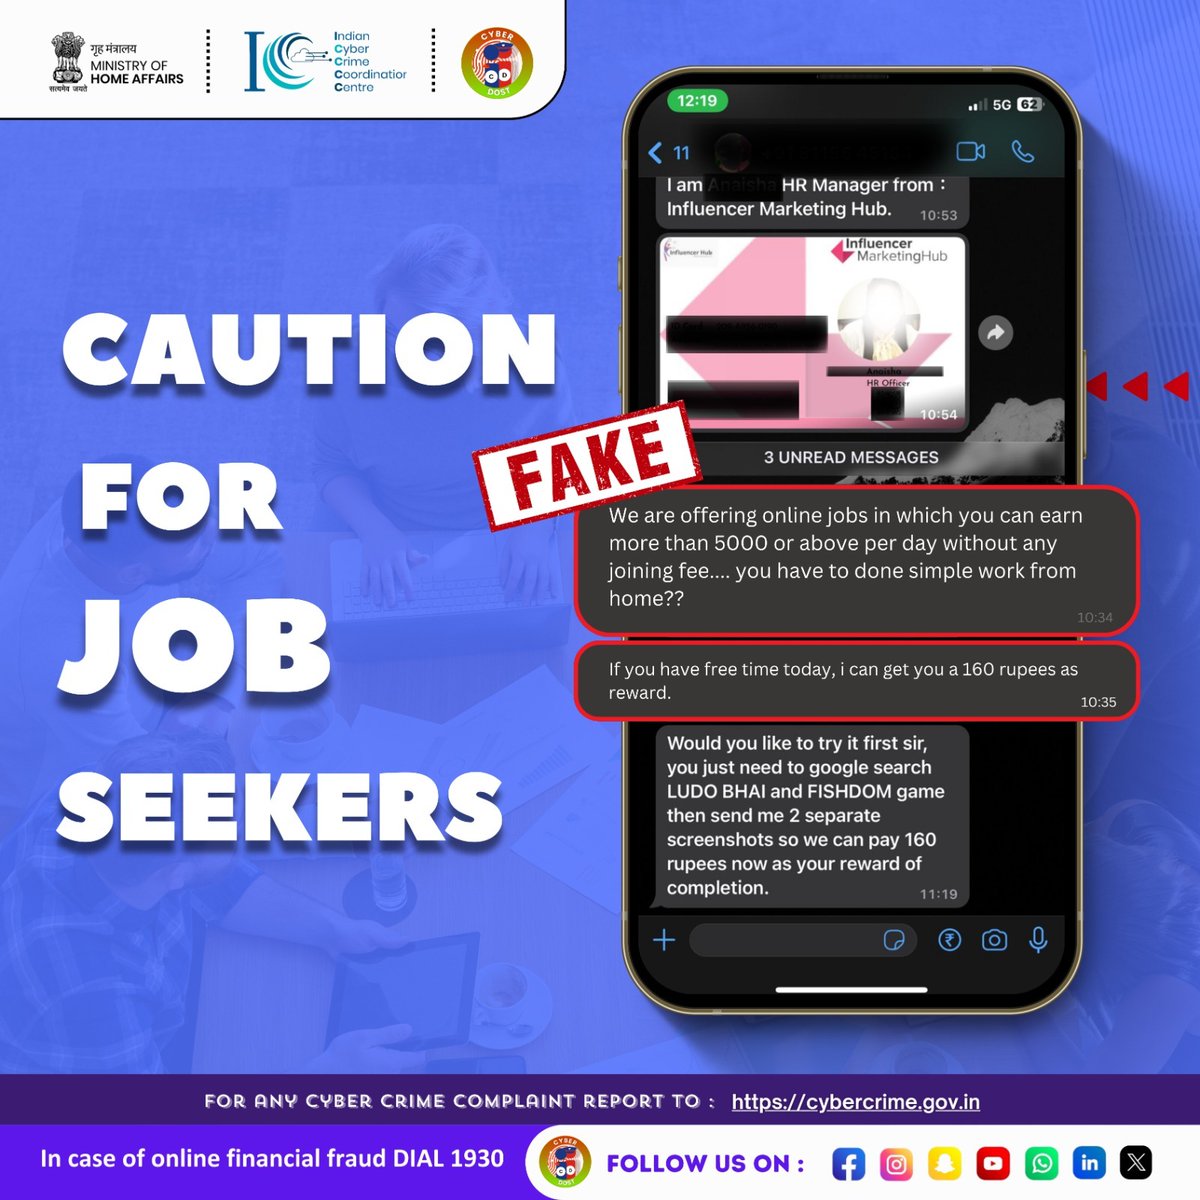 🚫 Beware of fraud job offers 🛑 Don't let scammers take advantage of your hard work and talents 💼 Protect yourself and research before accepting any job opportunities 🧐 #FraudJobAlert #StayVigilant #ProfessionalMindset #I4C #MHA #Cyberdost #Cybersecurity #Stayalert